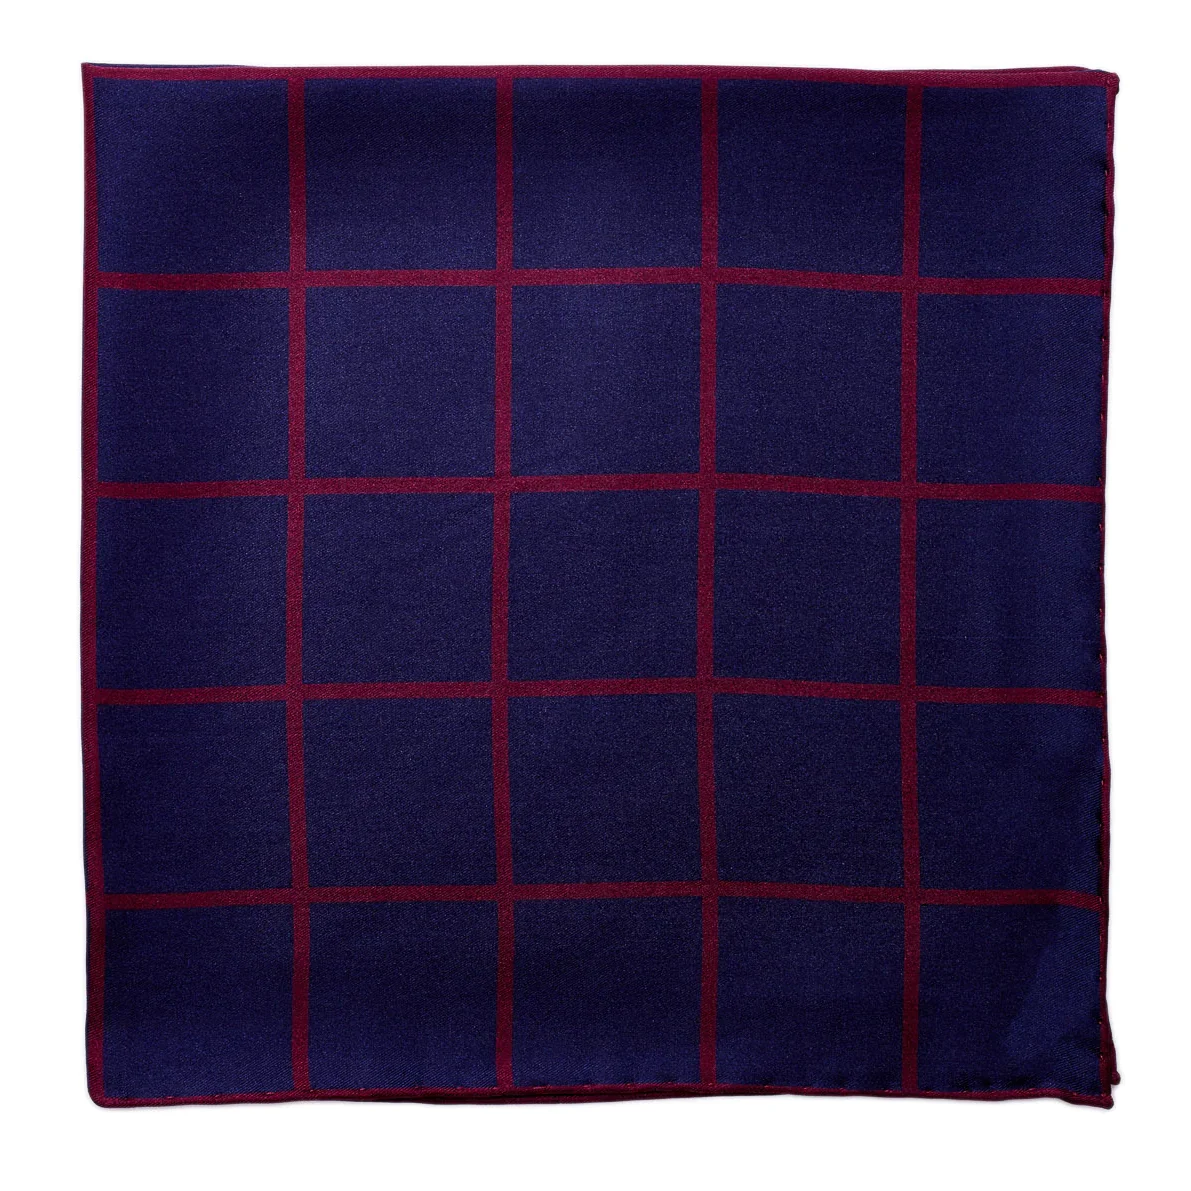 Image of Sovereign Grade Prince of Wales Pocket Square, Navy/Burgundy